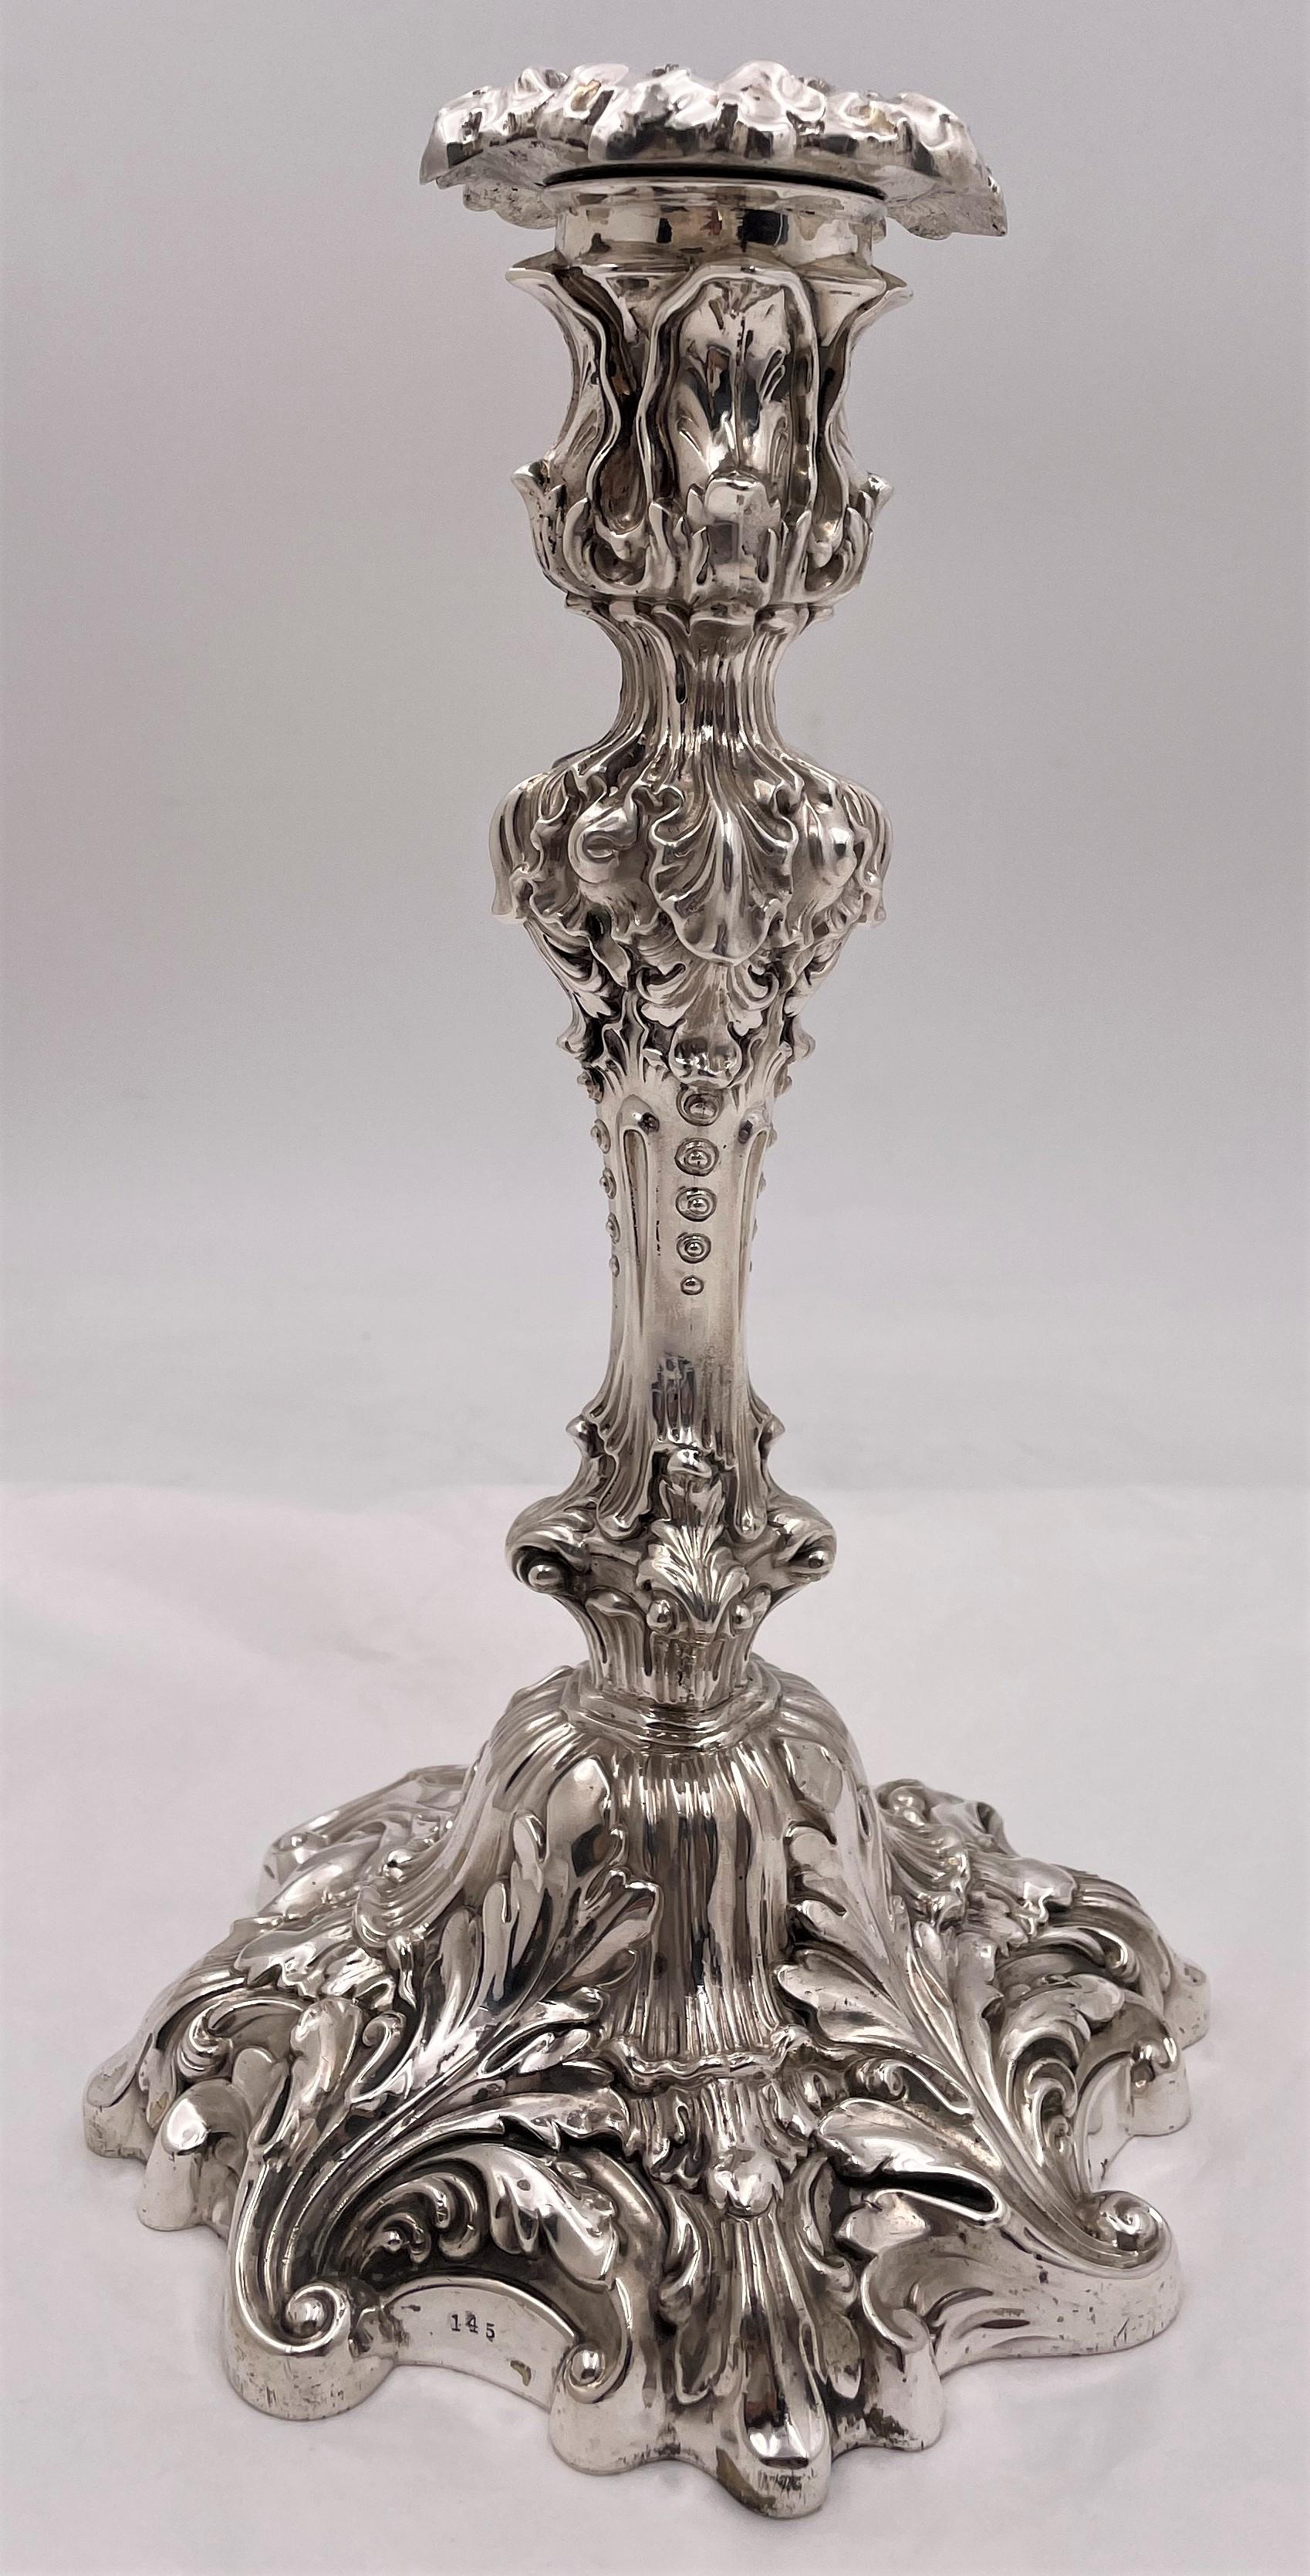 Early 20th Century Set of 4 Howard & Co. Sterling Silver 1901 Candlesticks in Baroque Revival Style For Sale